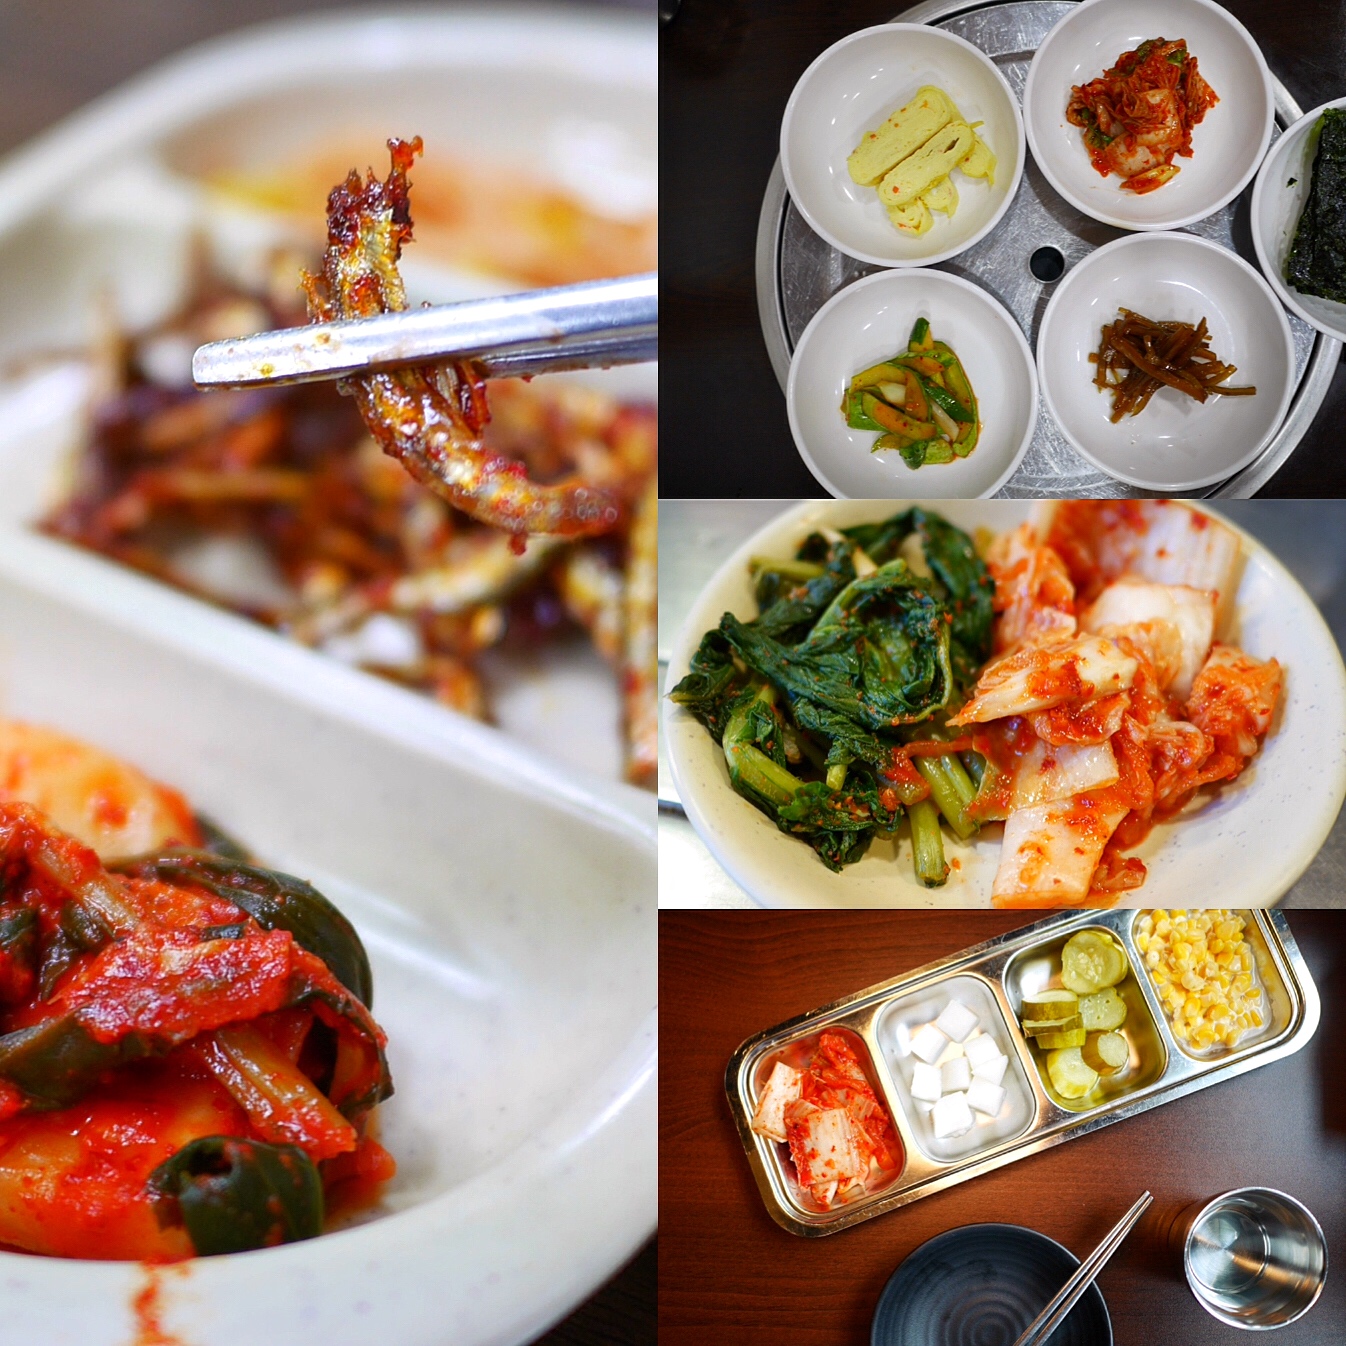 Seoul Food Guide 2015: How To Eat in Korea?  HeyTheresia  Indonesian Food  Travel Blogger